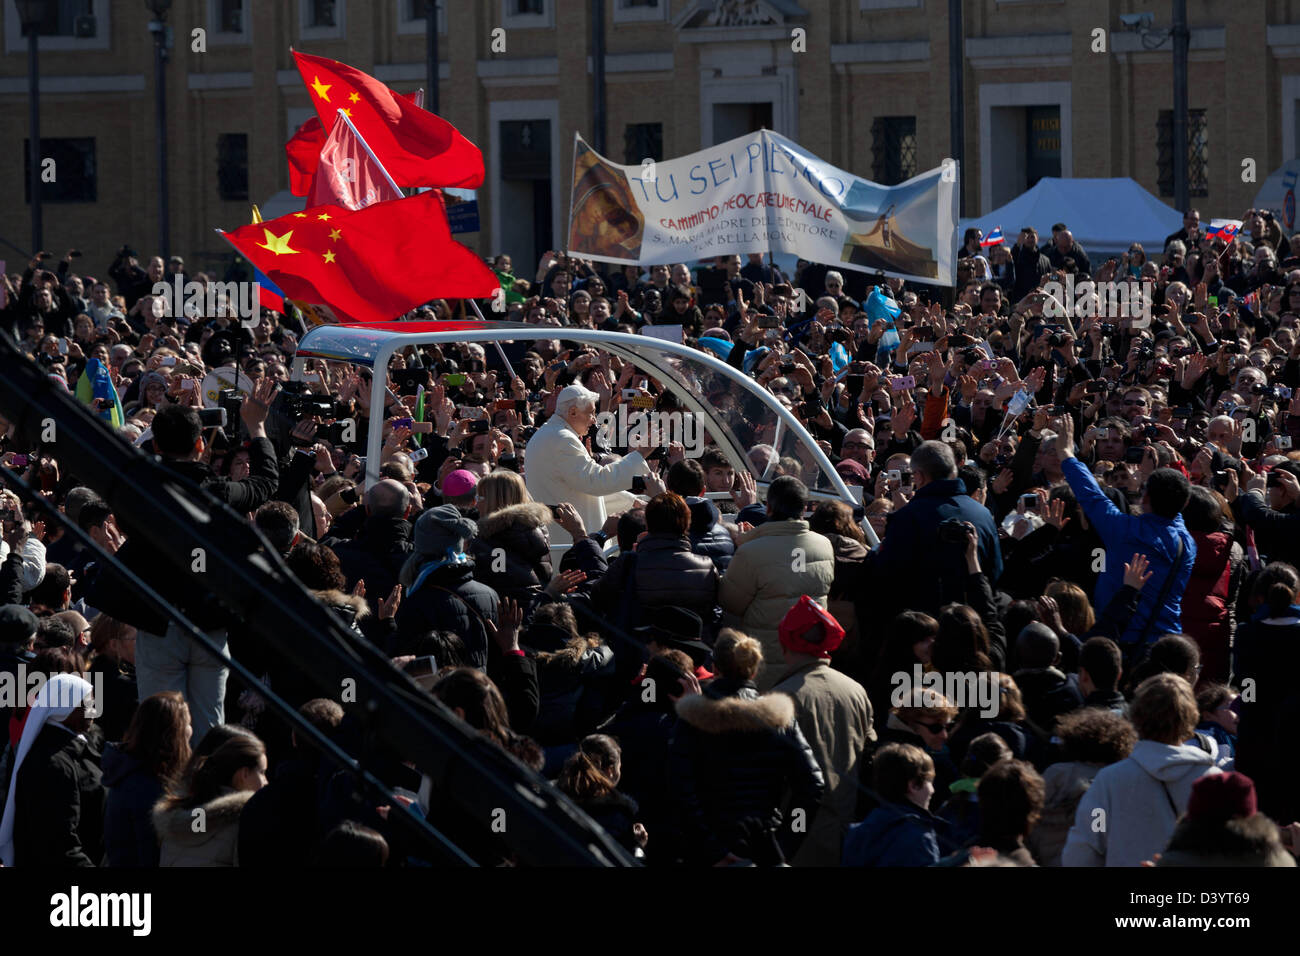 Rome, Italy. 27th February 2013 Pope Benedict XVI greets pilgrims in St Peter's Square at the Vatican. Credit: Nelson Pereira/Alamy Live News Stock Photo